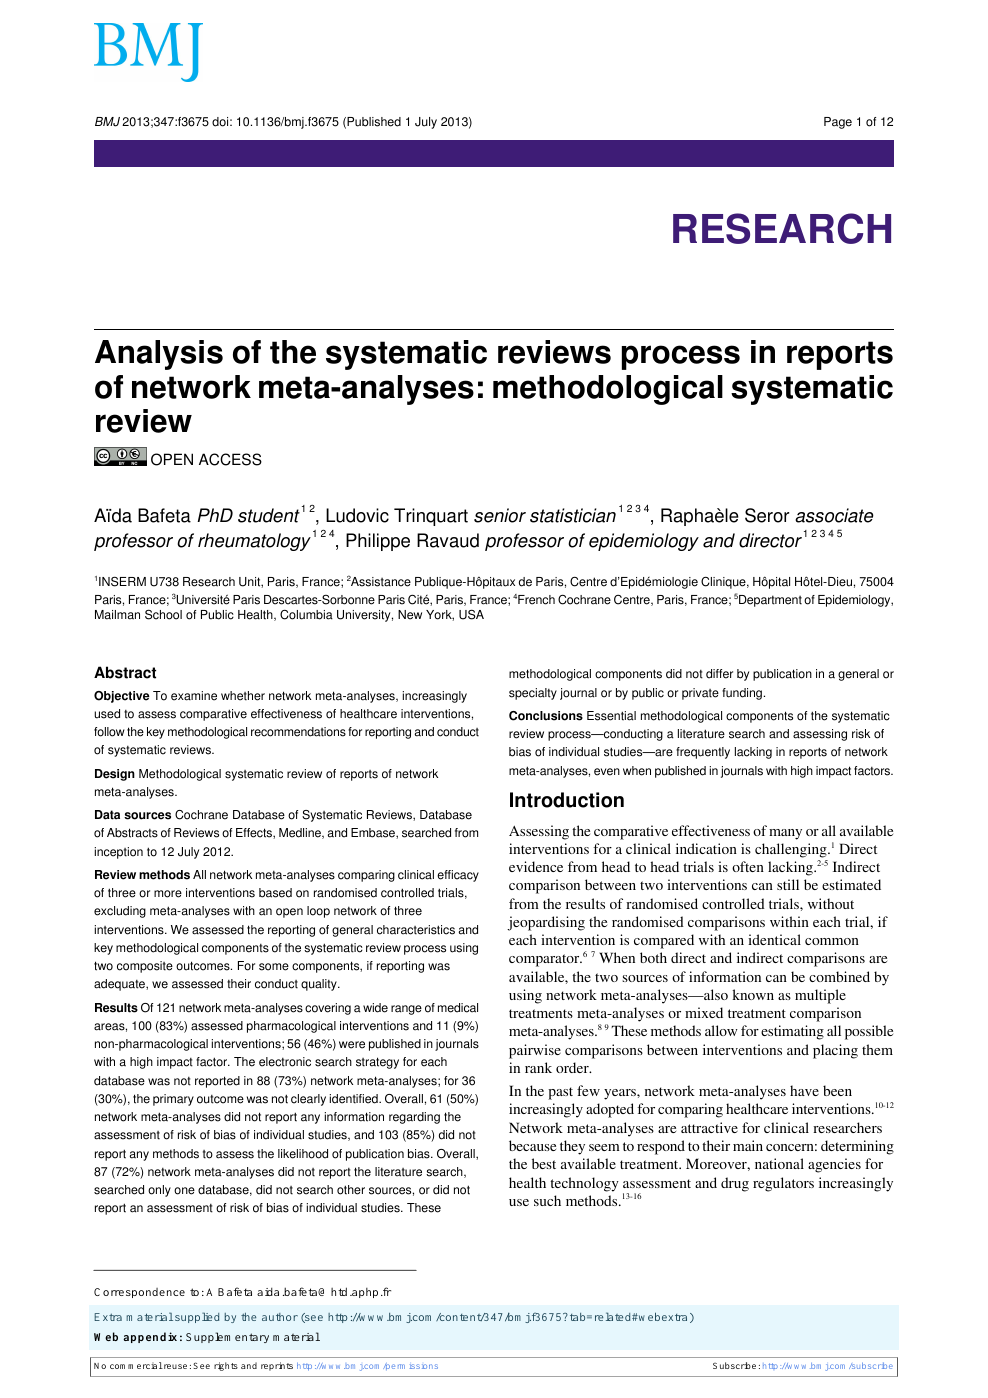 Interpretation of subgroup analyses in systematic reviews: A tutorial -  Clinical Epidemiology and Global Health